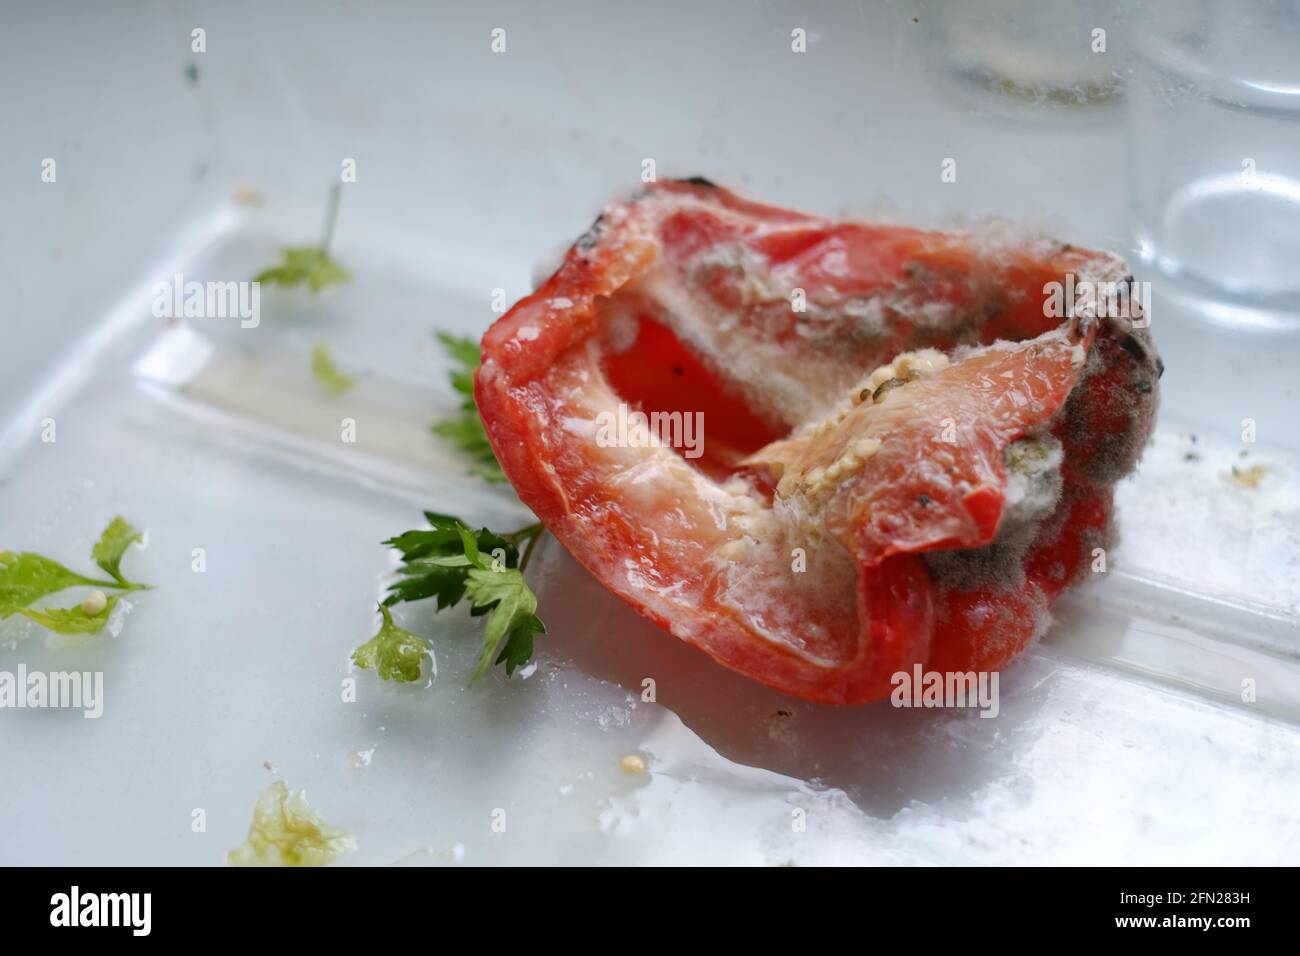 Food waste. Red bell pepper capsicum forgotten and going mouldy in fridge. Stock Photo